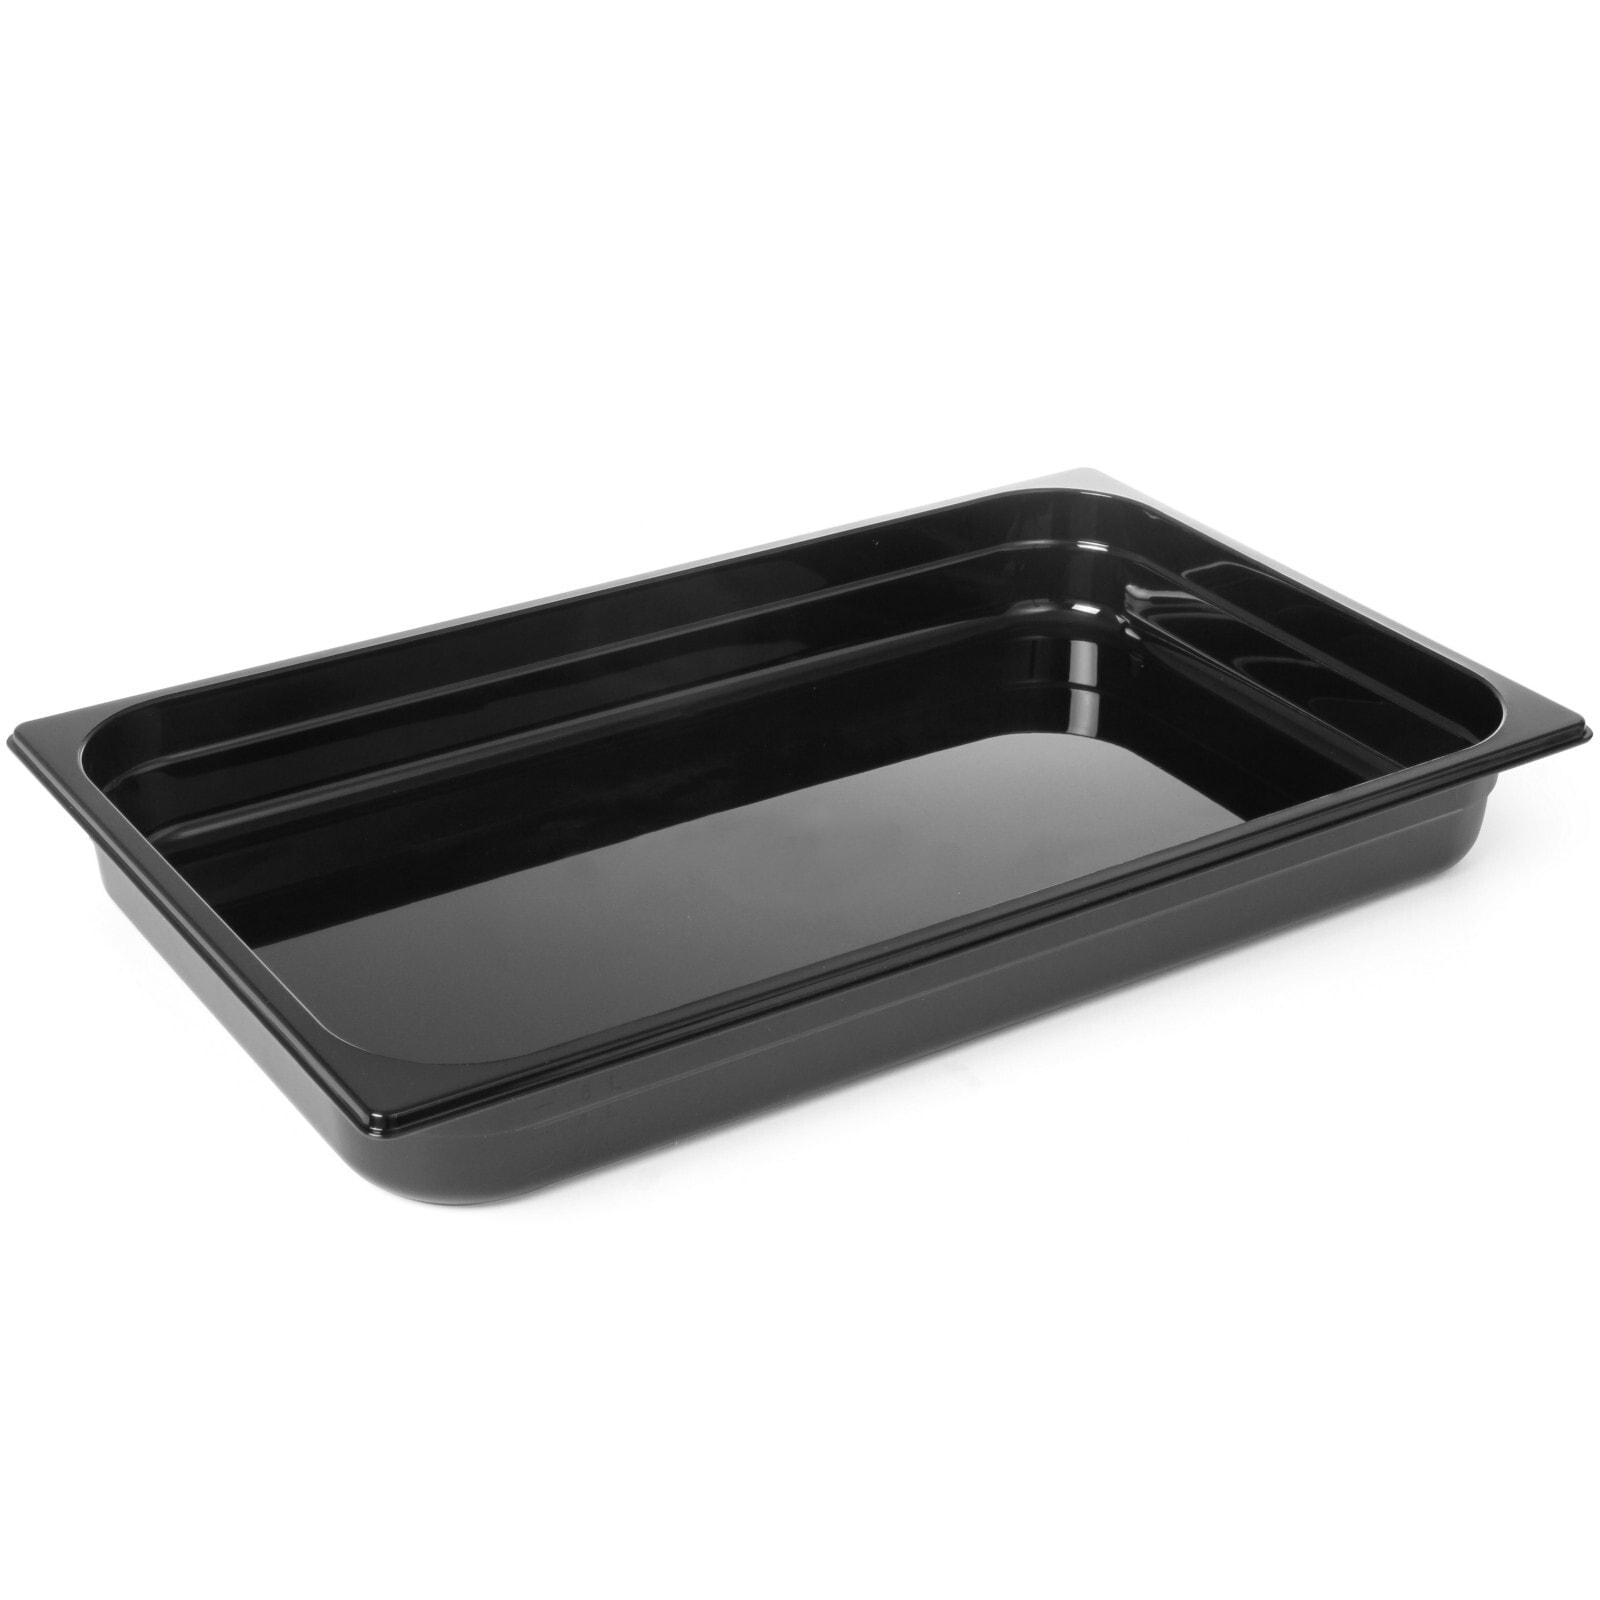 Gastronomy container GN 1/1 made of black polycarbonate 530x325x150mm 21L Hendi 862216